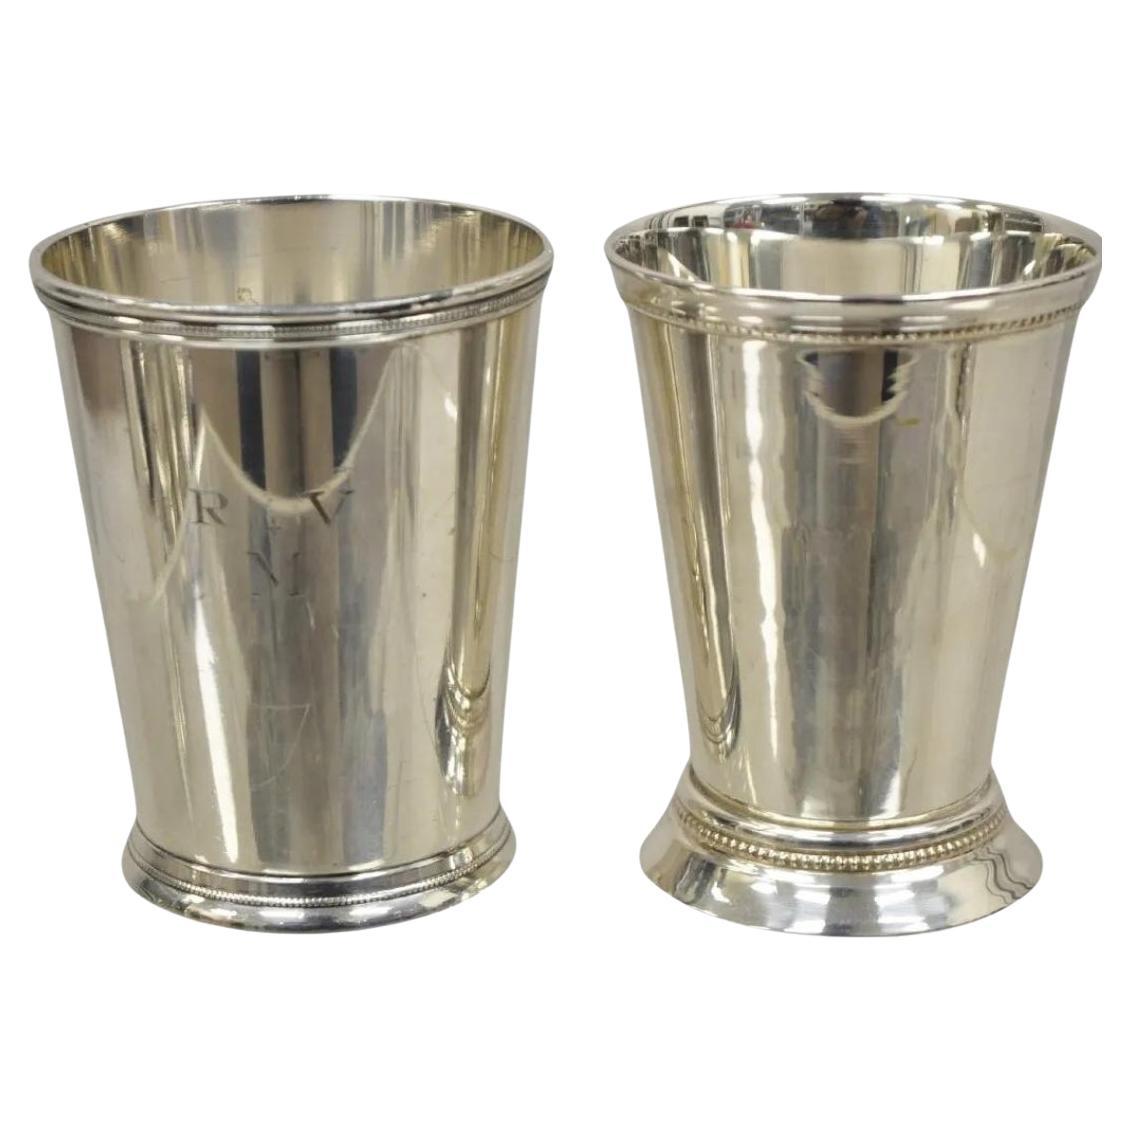 2 Vintage Silver Plated Mint Julep Cups Tumblers 1 with Monogram - 2 Pieces For Sale